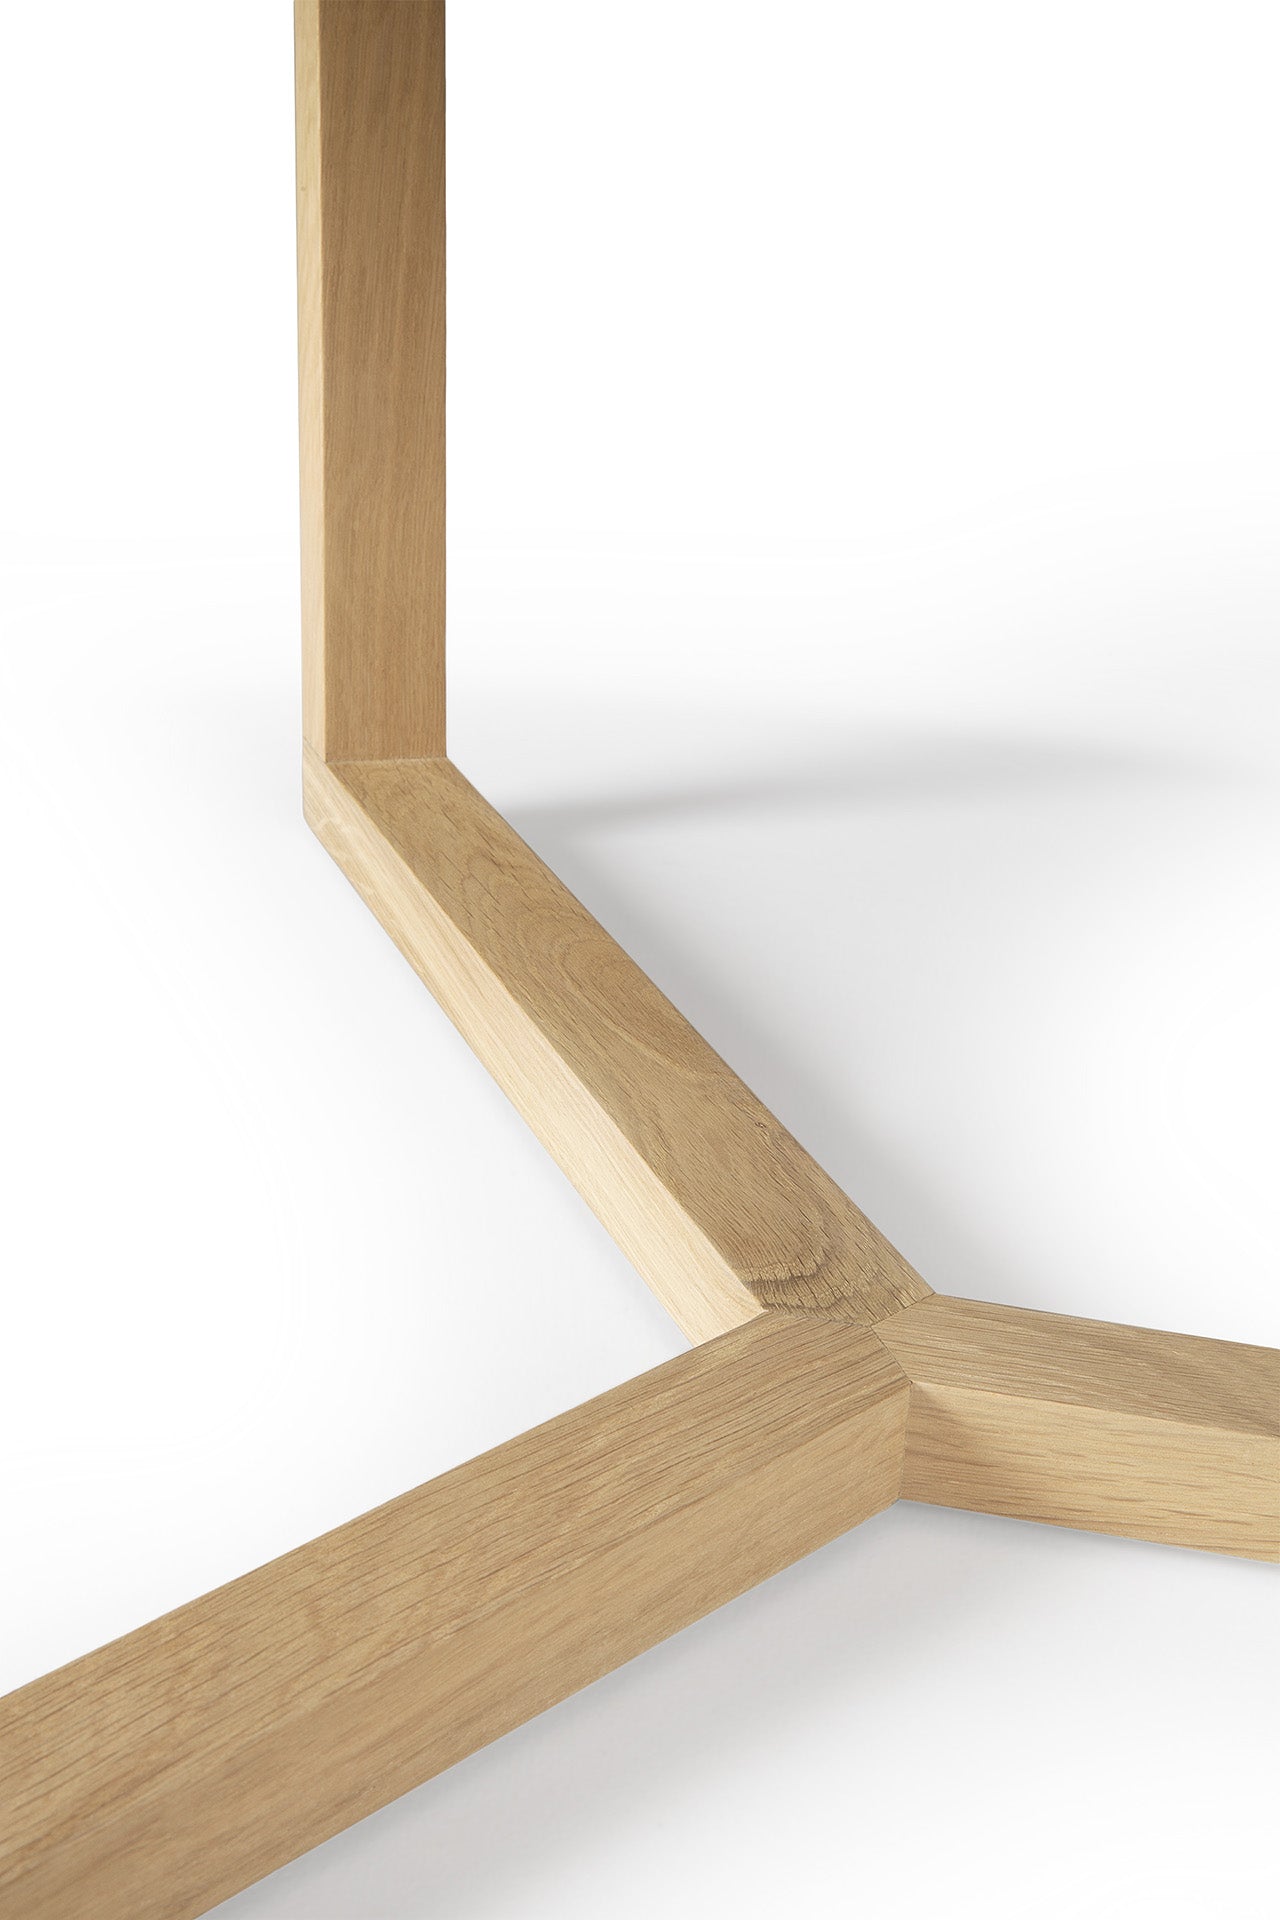 Ethnicraft Oak Tripod Coffee Table available from Make Your House A Home, Bendigo, Victoria, Australia